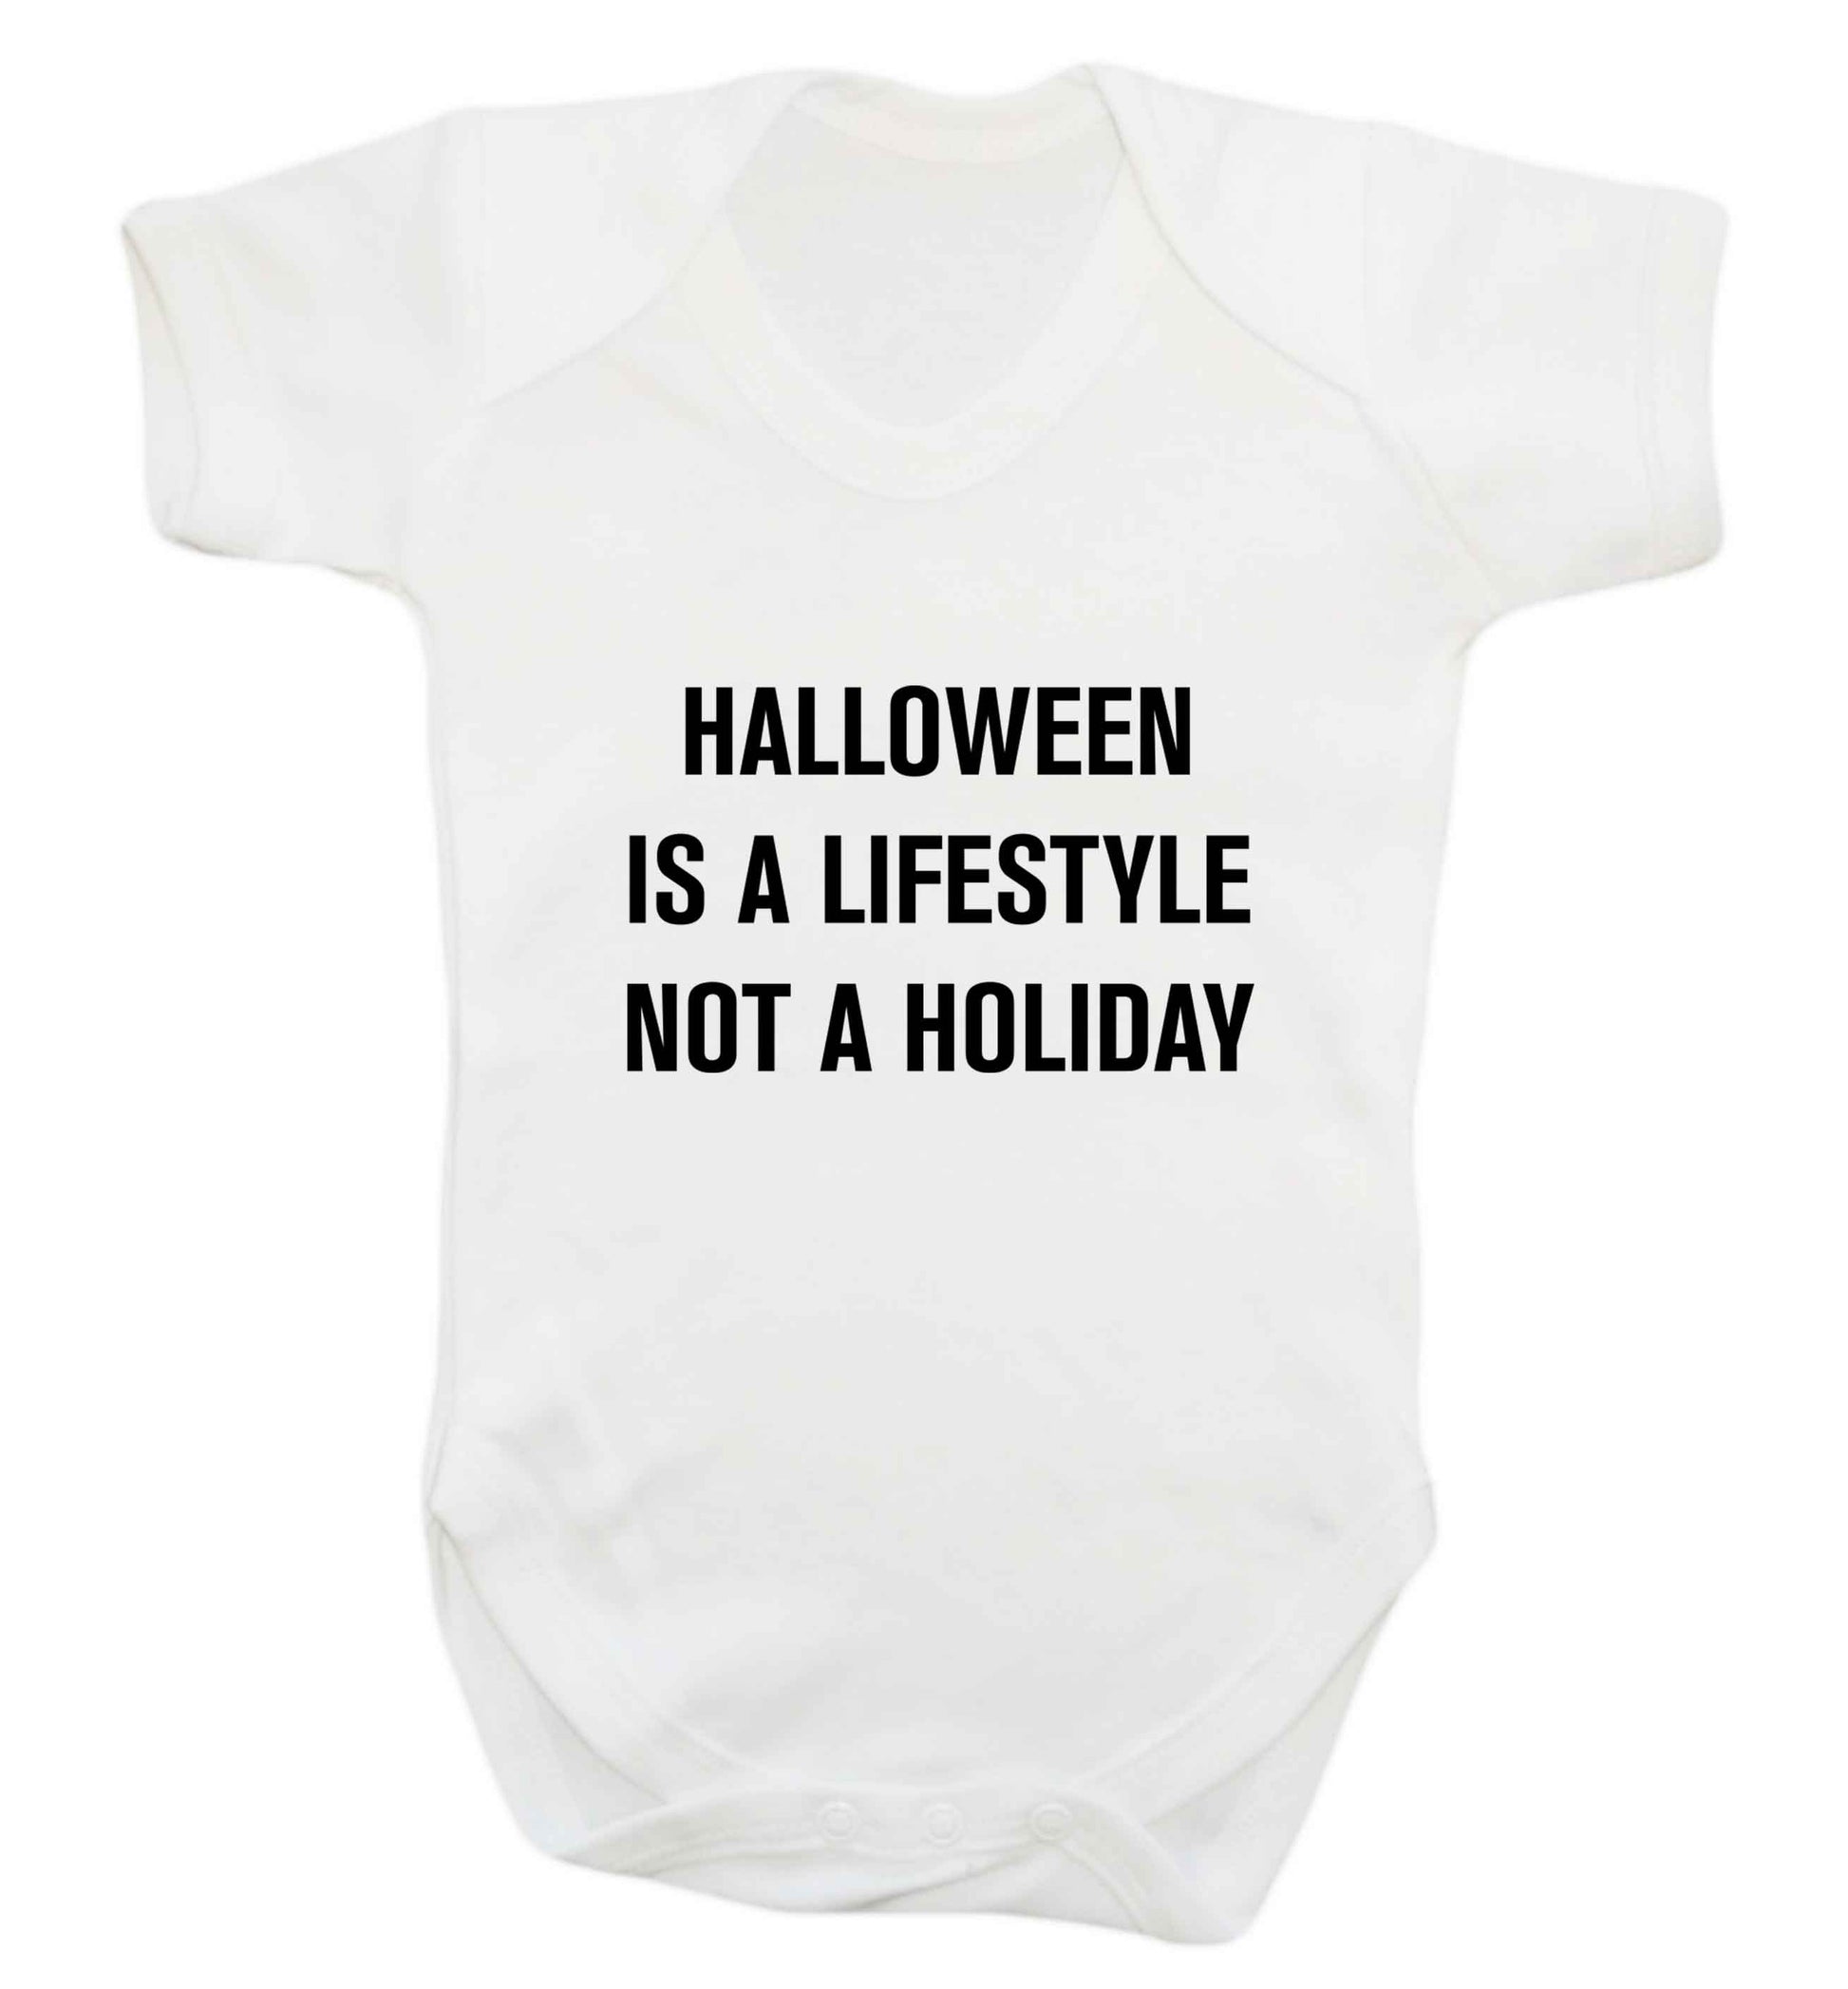 Halloween is a lifestyle not a holiday baby vest white 18-24 months